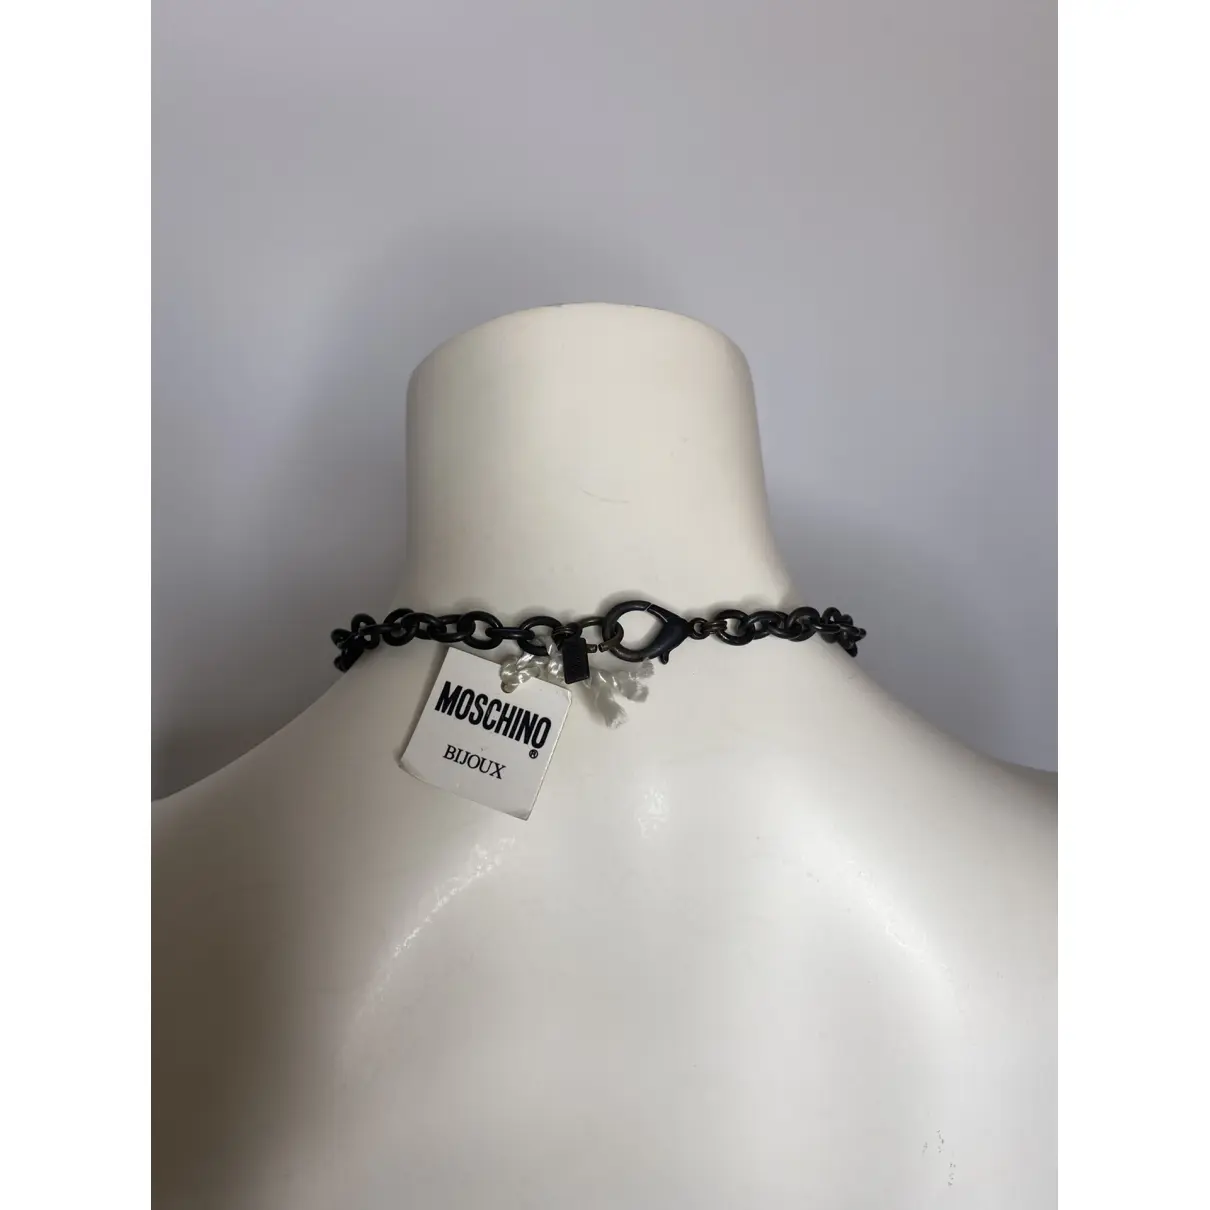 Necklace Moschino - Vintage